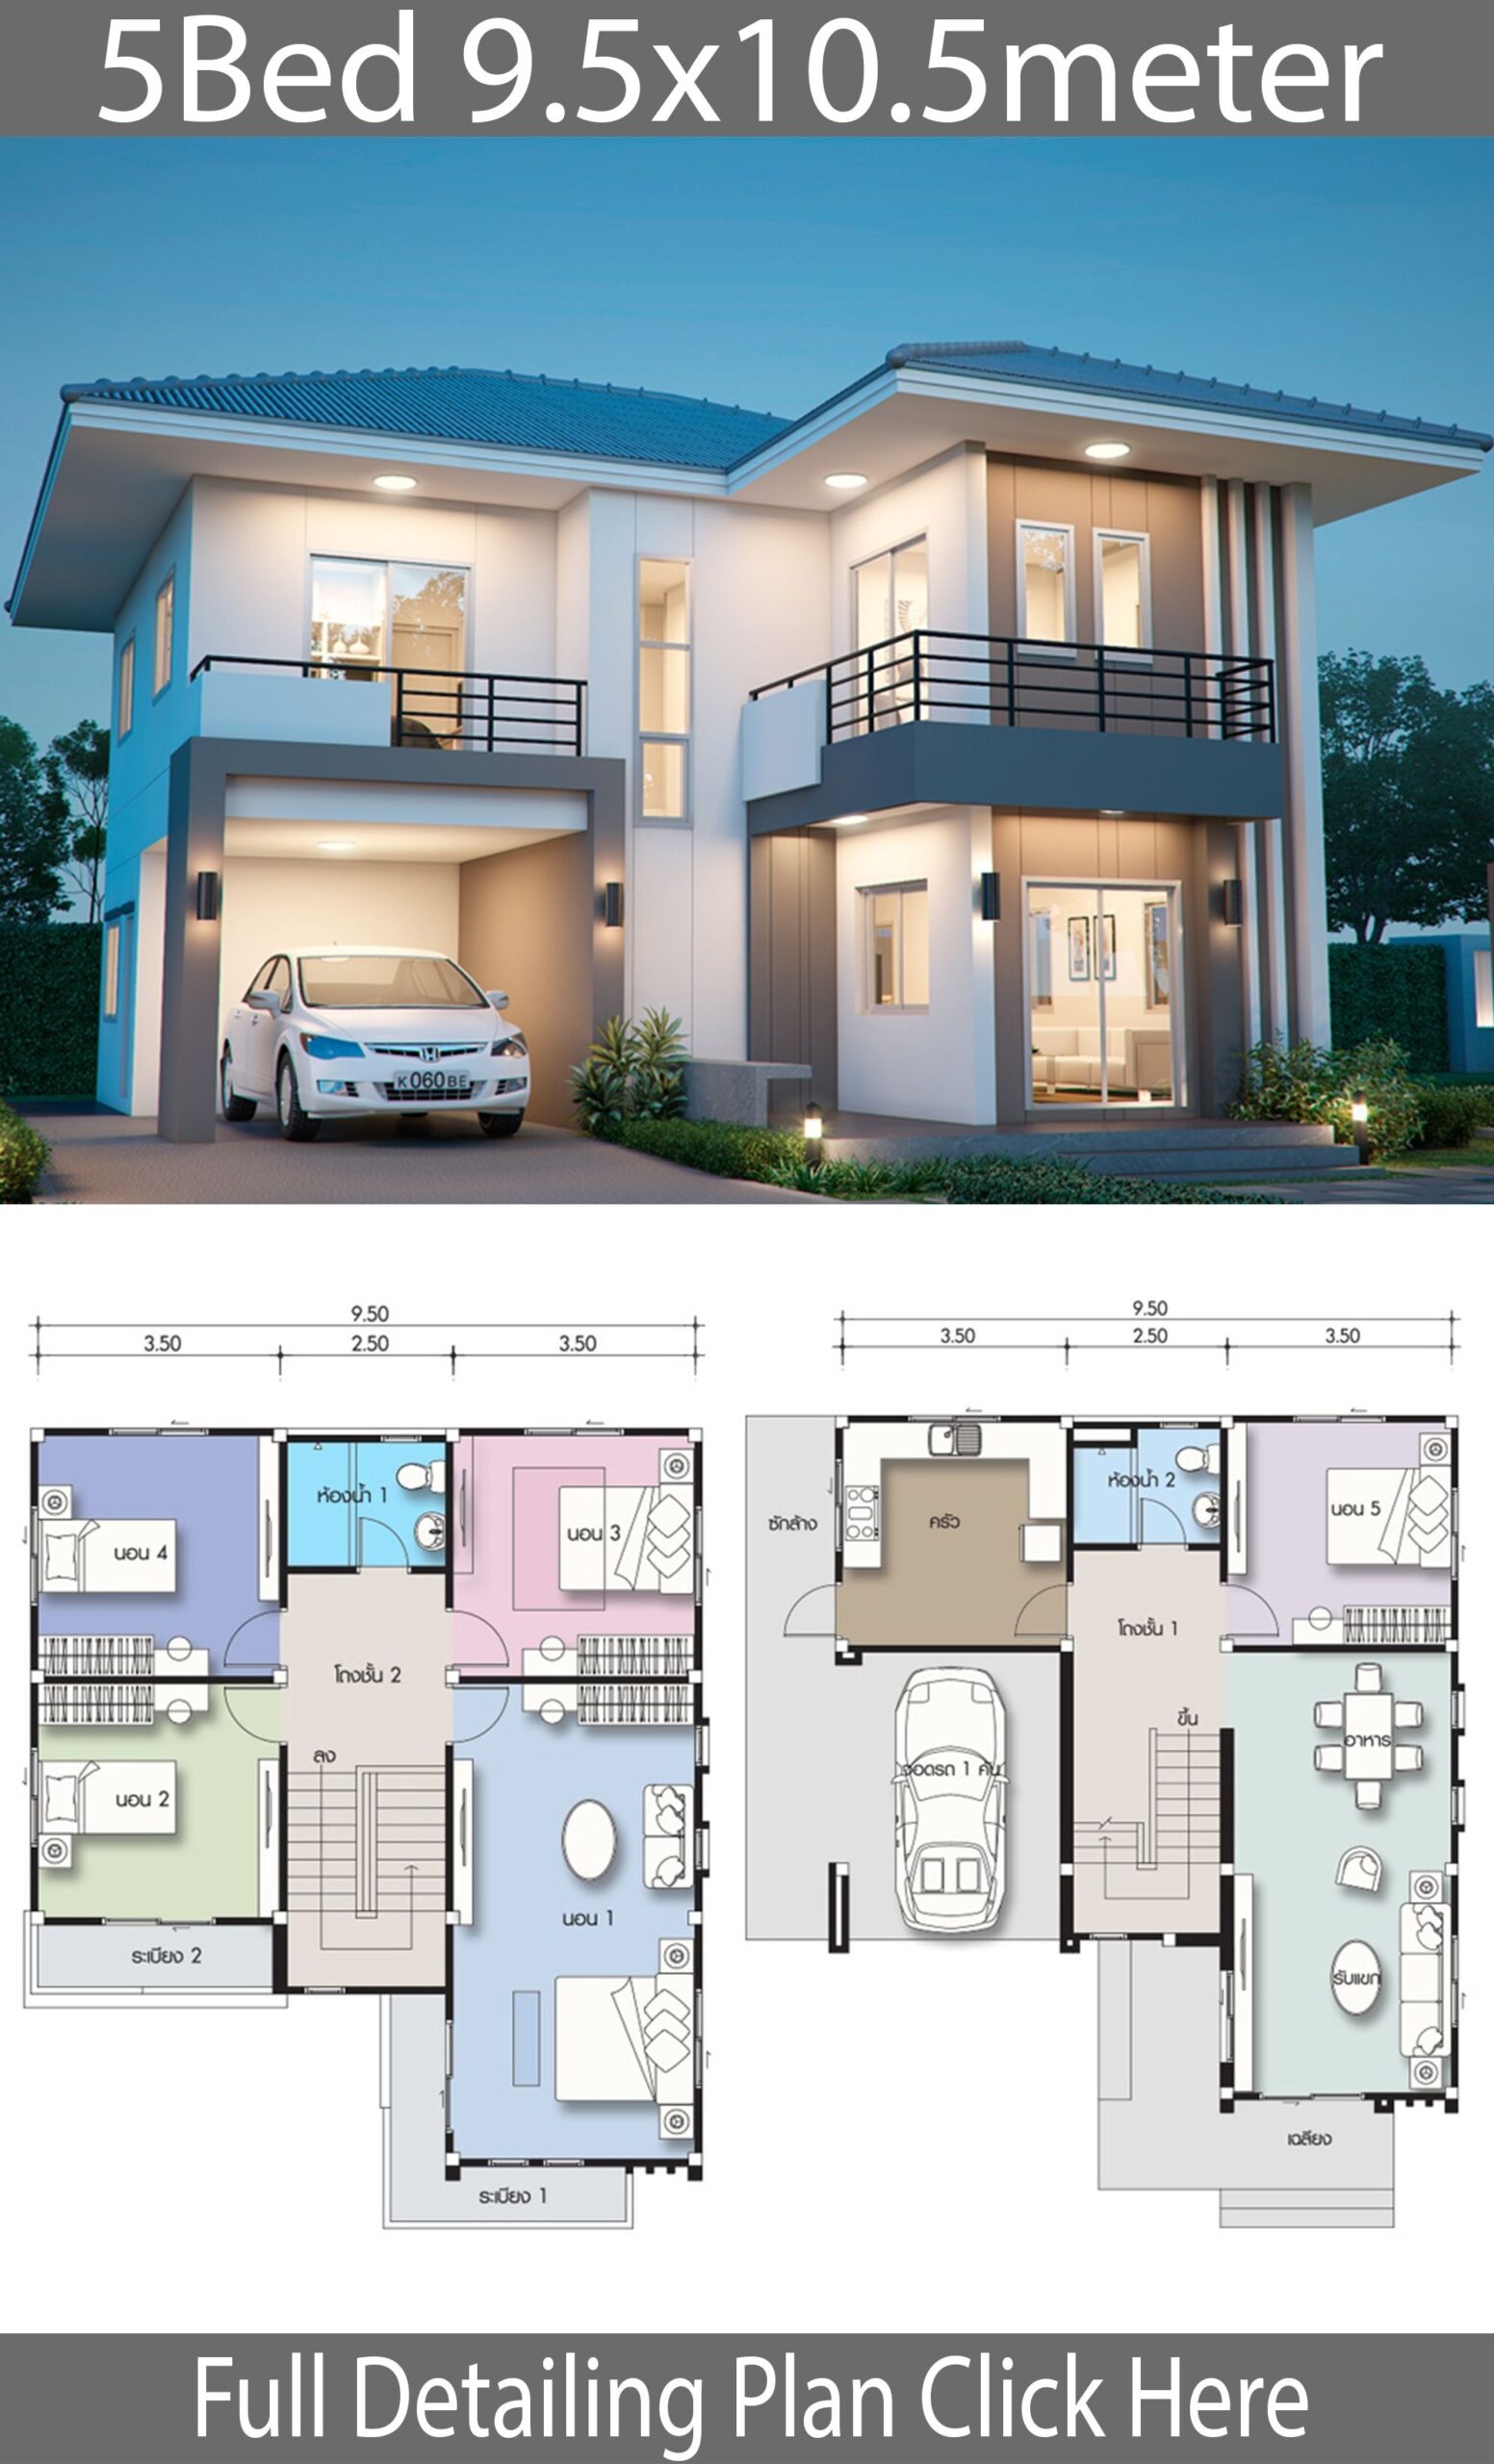 Wonderful house design plan 9 5x10 5m with 5 bedrooms house idea | duplex house pertaining to interesting pi s of 4 bedroom 3d plan